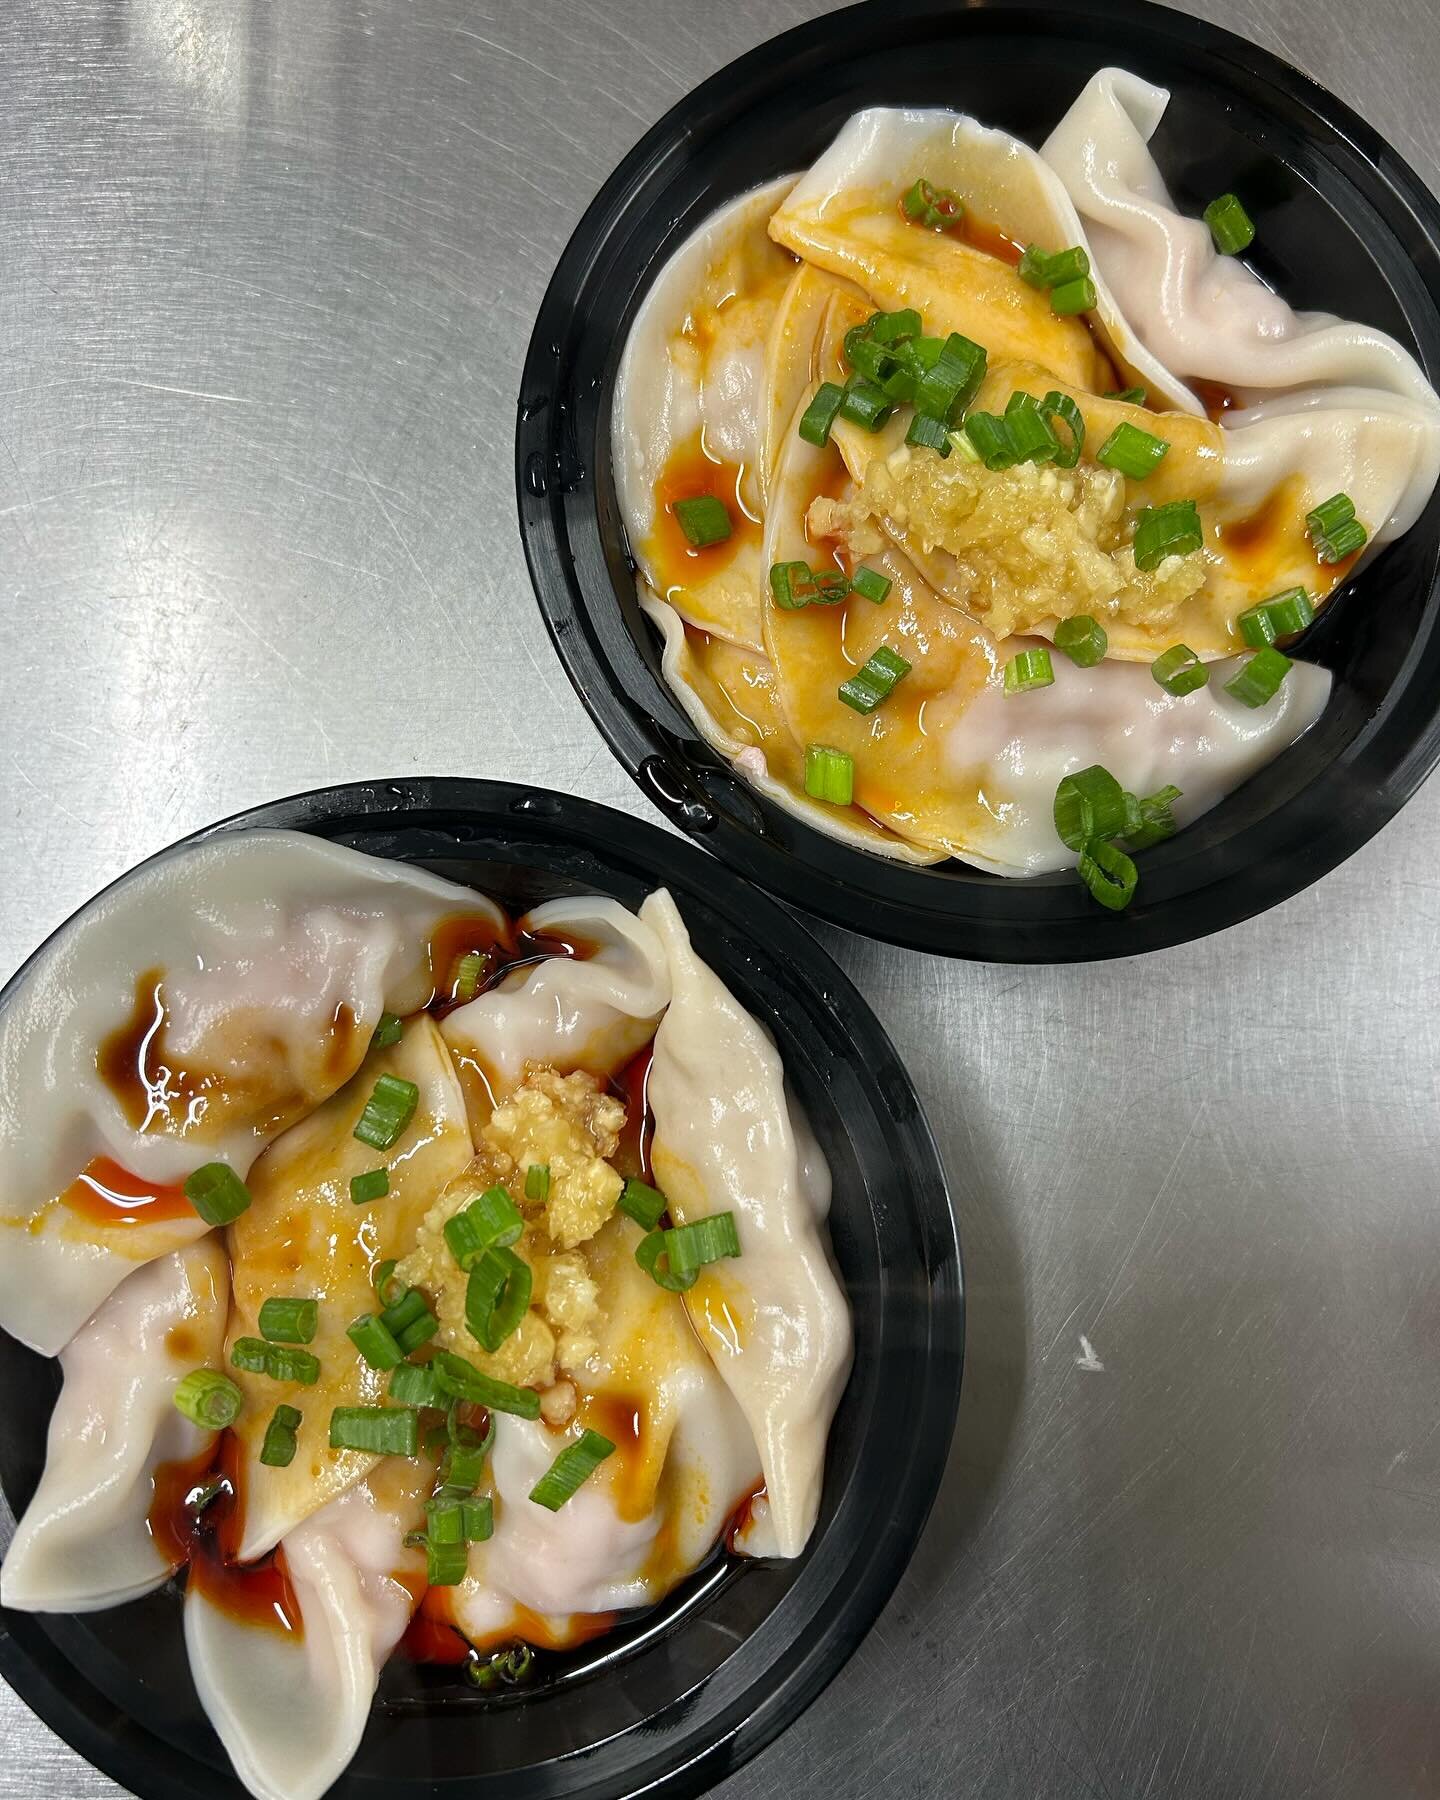 Who else is craving Chef Z&rsquo;s Dumplings 红油水饺 for lunch? 🍽️🤤

#philadelphia #philadelphiarestaurants #philadelphiafoodie #philadelphiafood #philadelphiafinds #philly #phillyrestaurants #phillyfood #phillyfoodie #phillyeats #phillygoodeats #phil